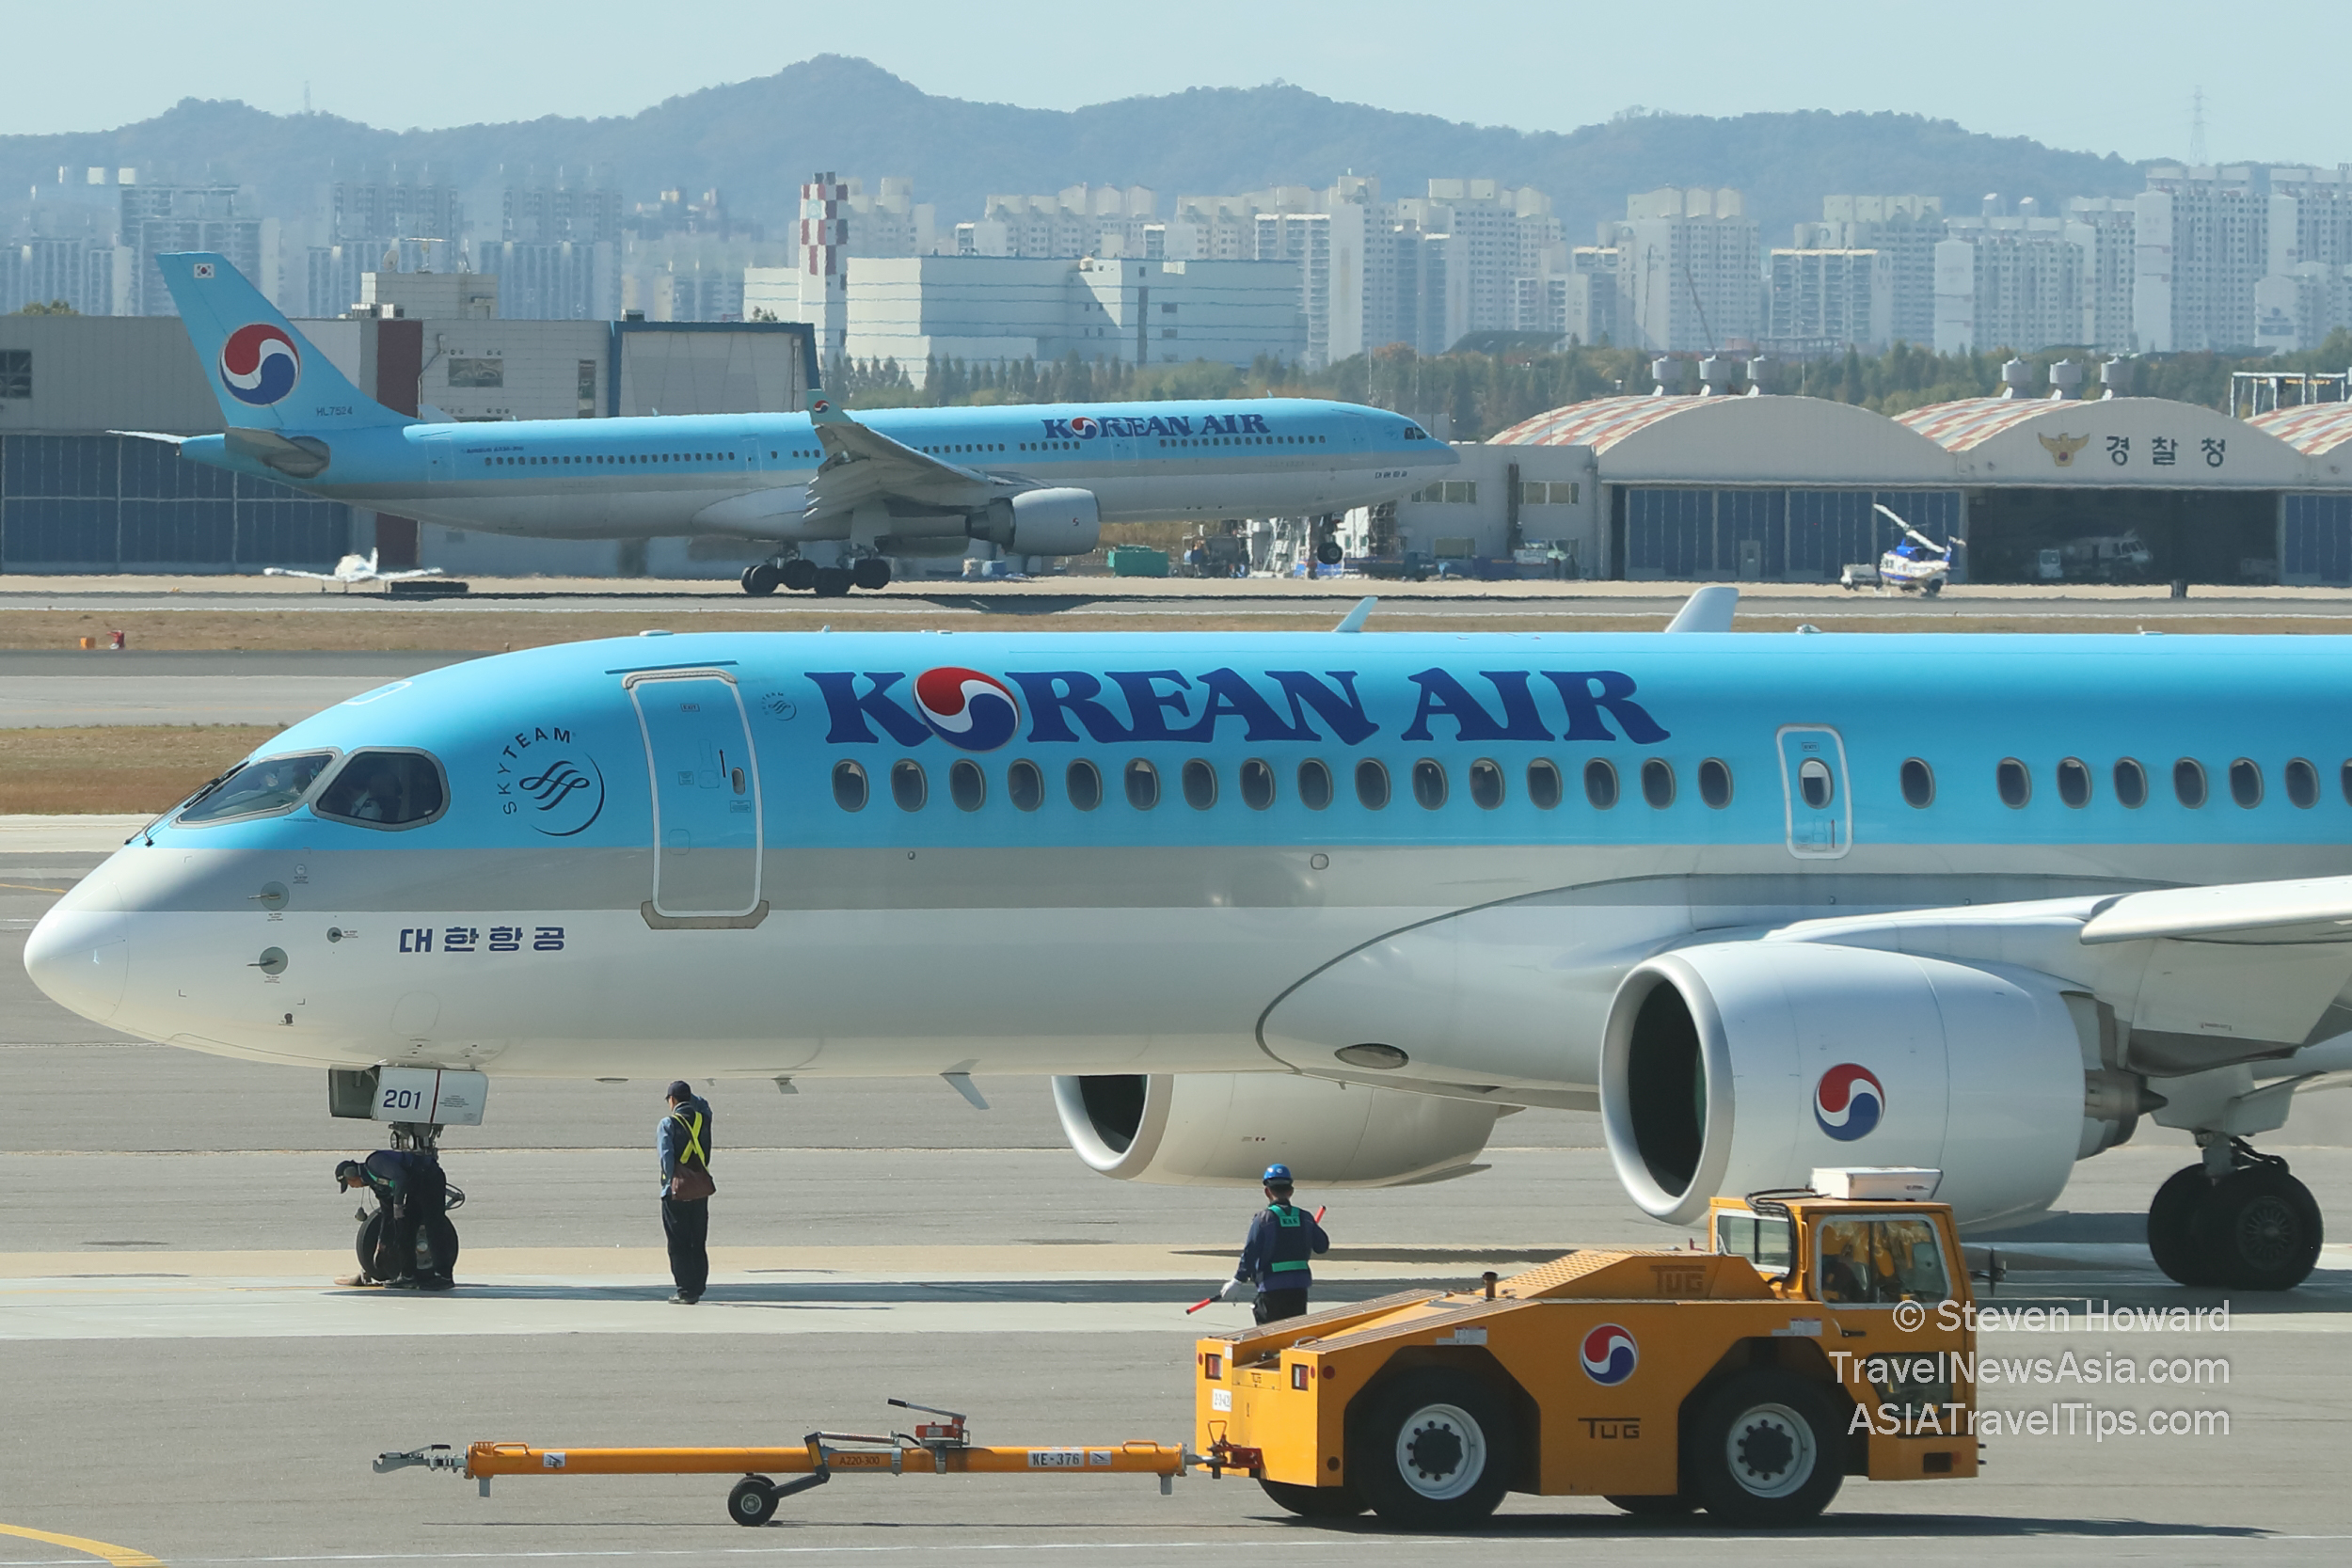 Korean Air Airbus A220-300 (formerly the Bombardier CS300) preparing to taxi to the runway for takeoff while an Airbus A330 in the background takes to the sky. Picture taken at Gimpo International Airport on 17 October 2018 by Steven Howard of TravelNewsAsia.com. Click to enlarge.